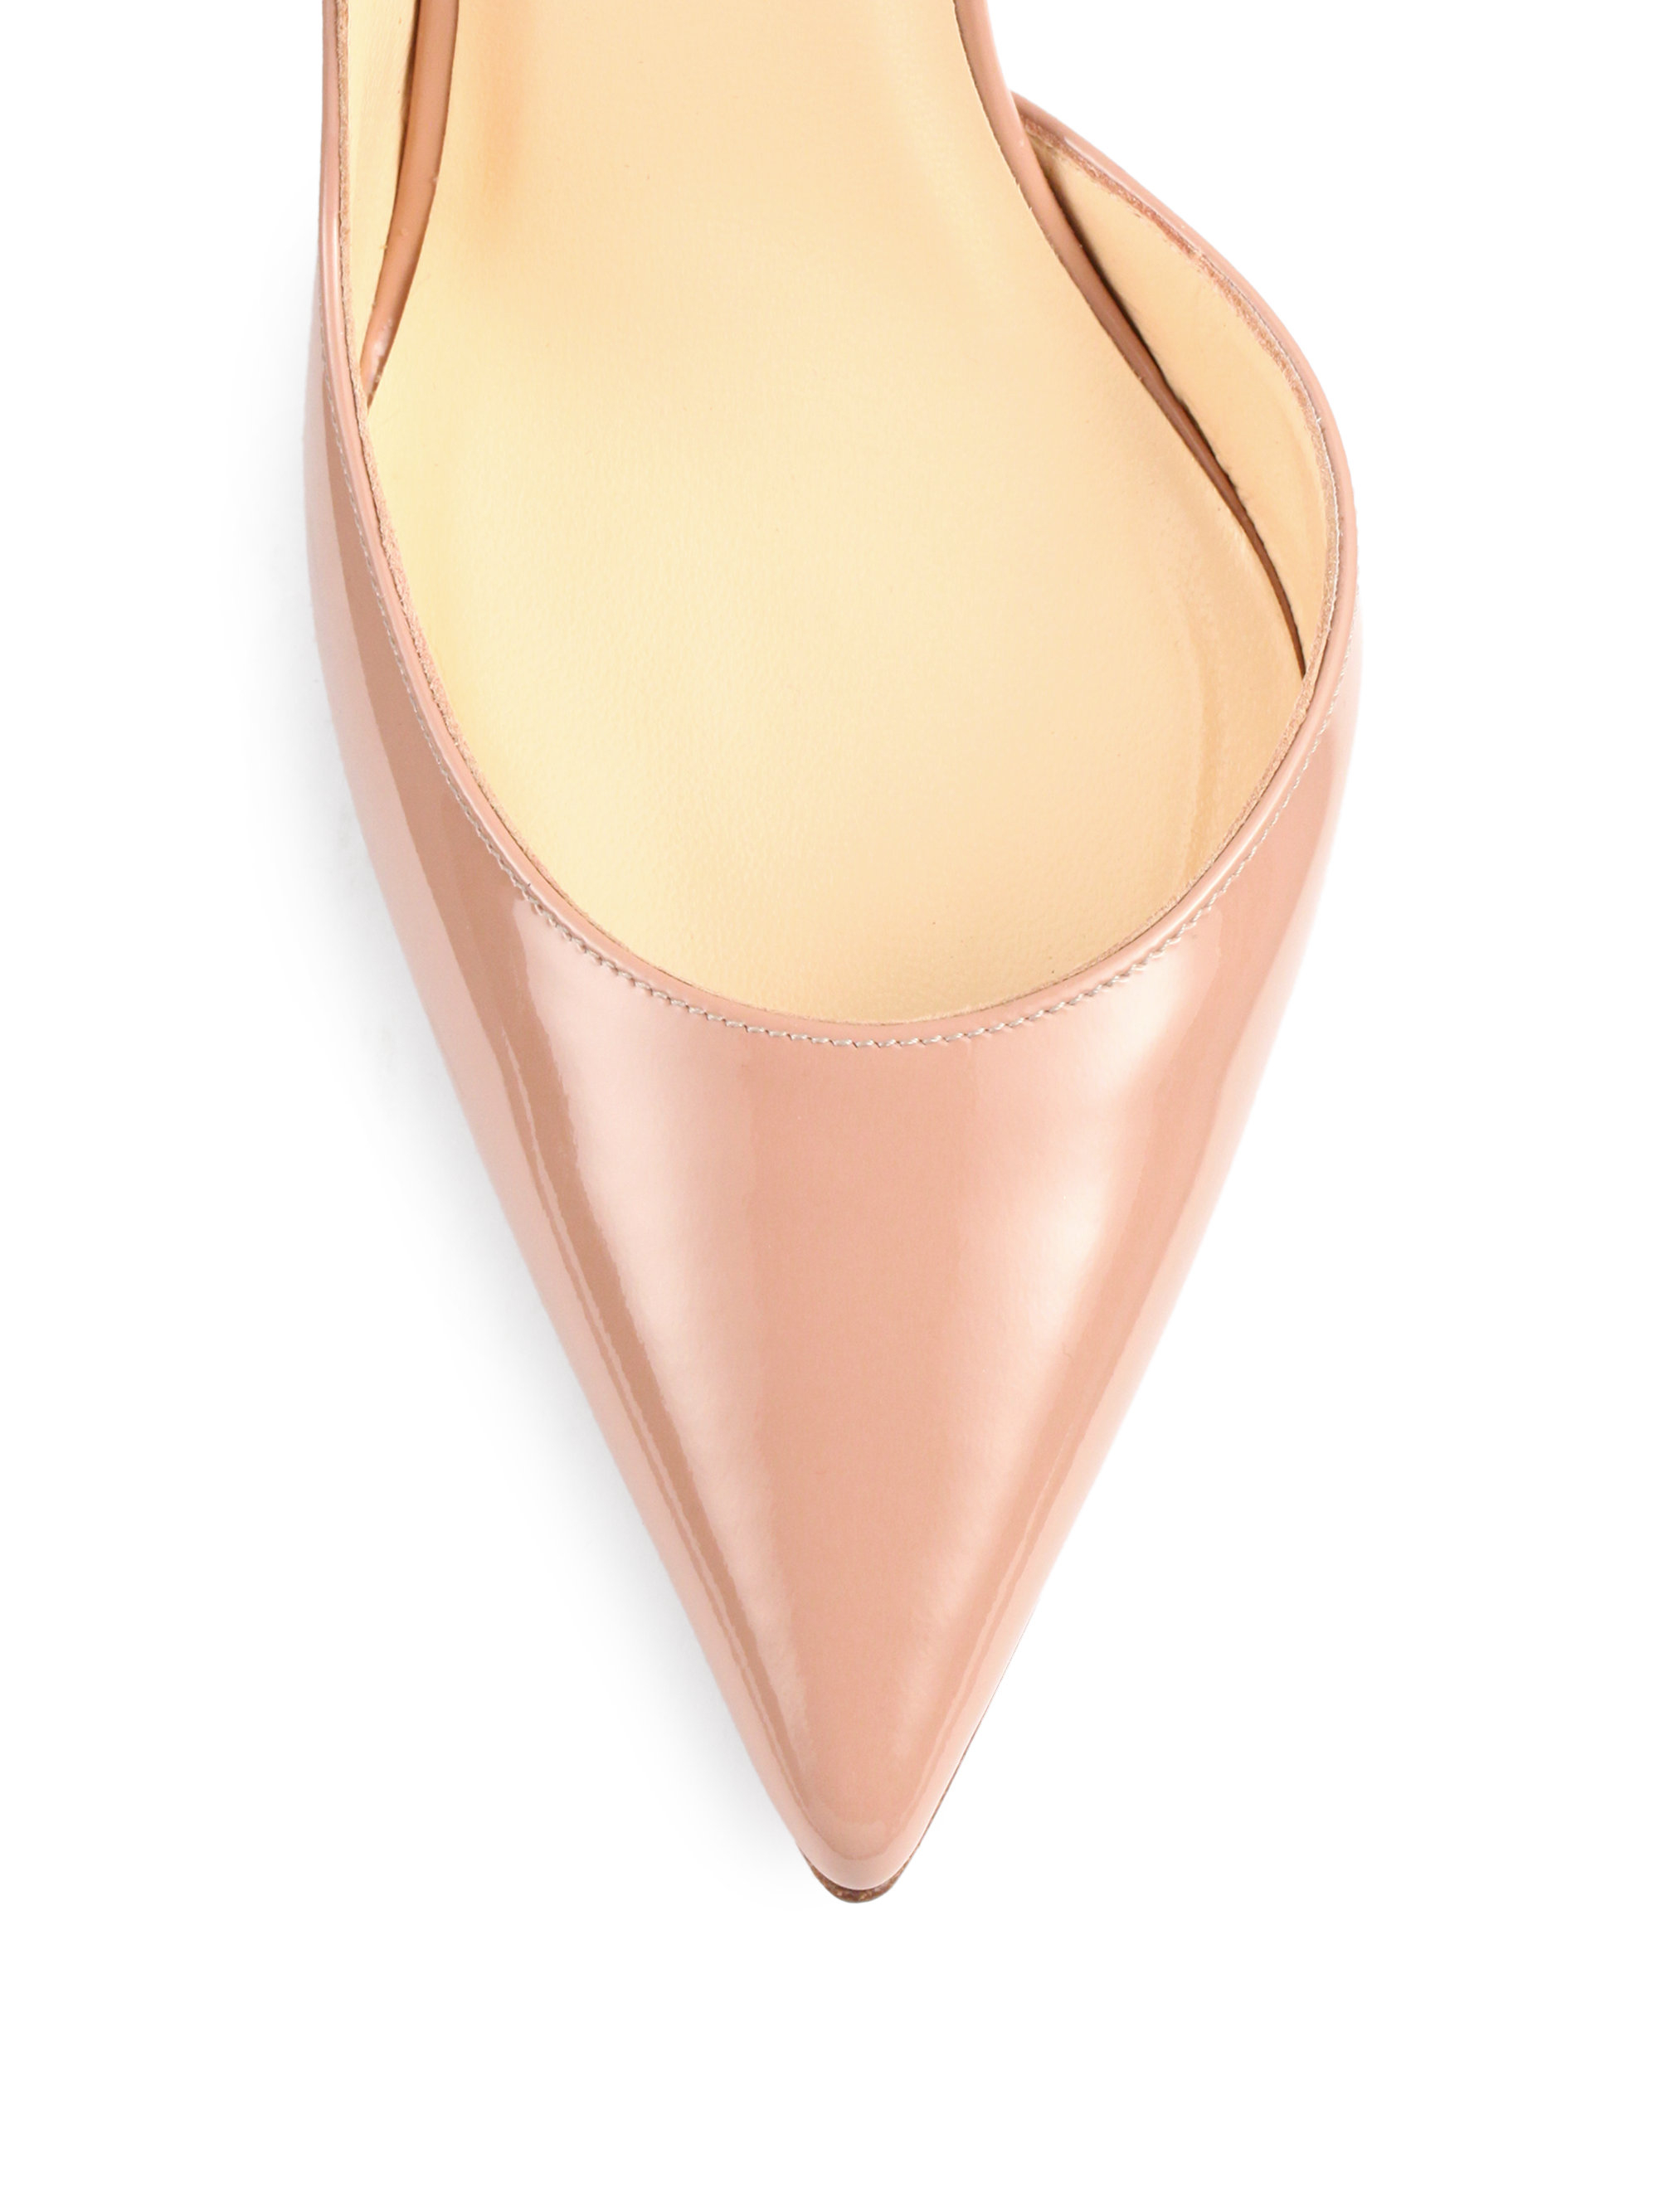 Artesur » christian louboutin round-toe d'Orsay pumps Pink patent leather